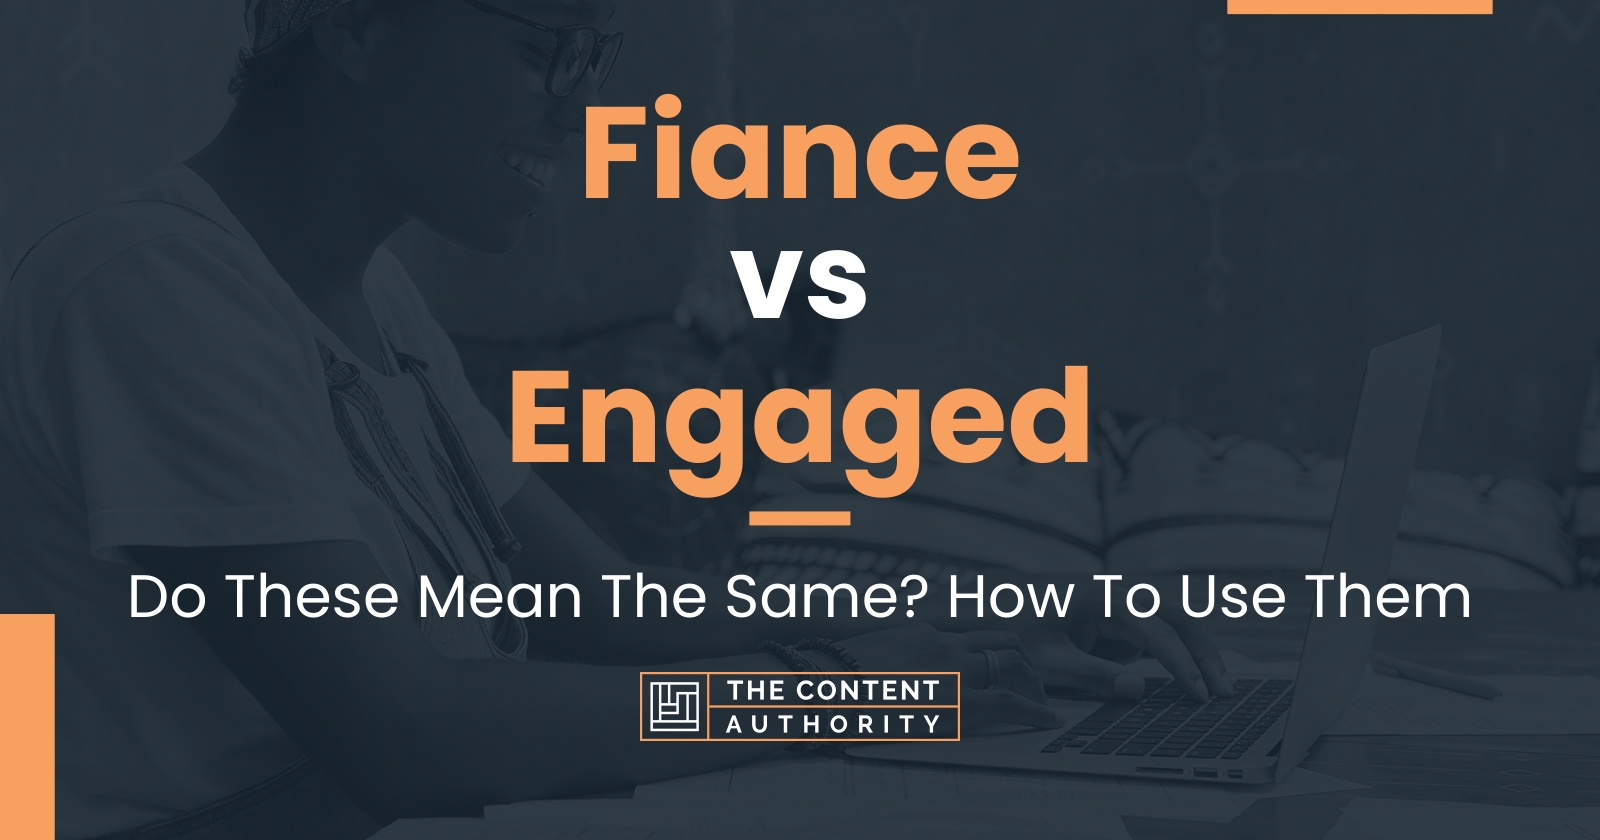 Fiance vs Engaged: Do These Mean The Same? How To Use Them